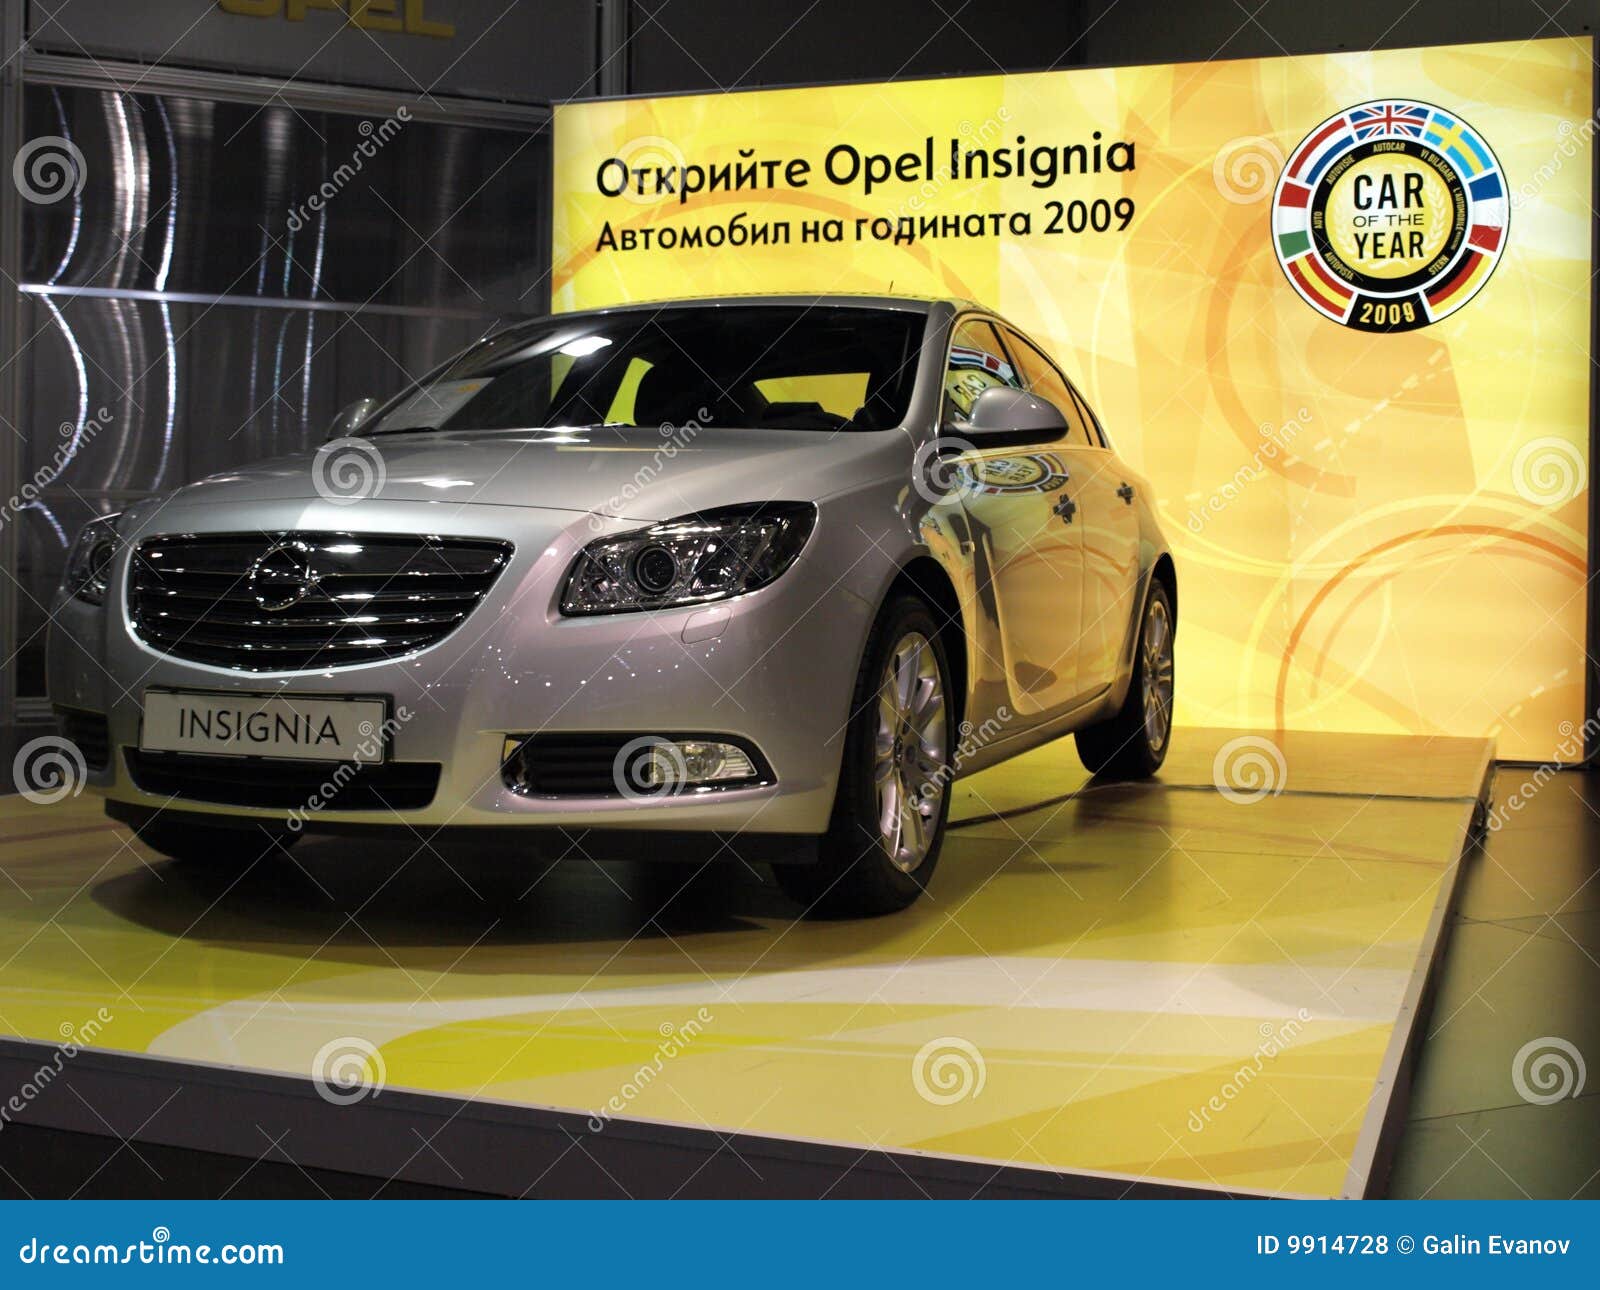 Opel Insignia - Car of the Year 2009 Editorial Stock Photo - Image